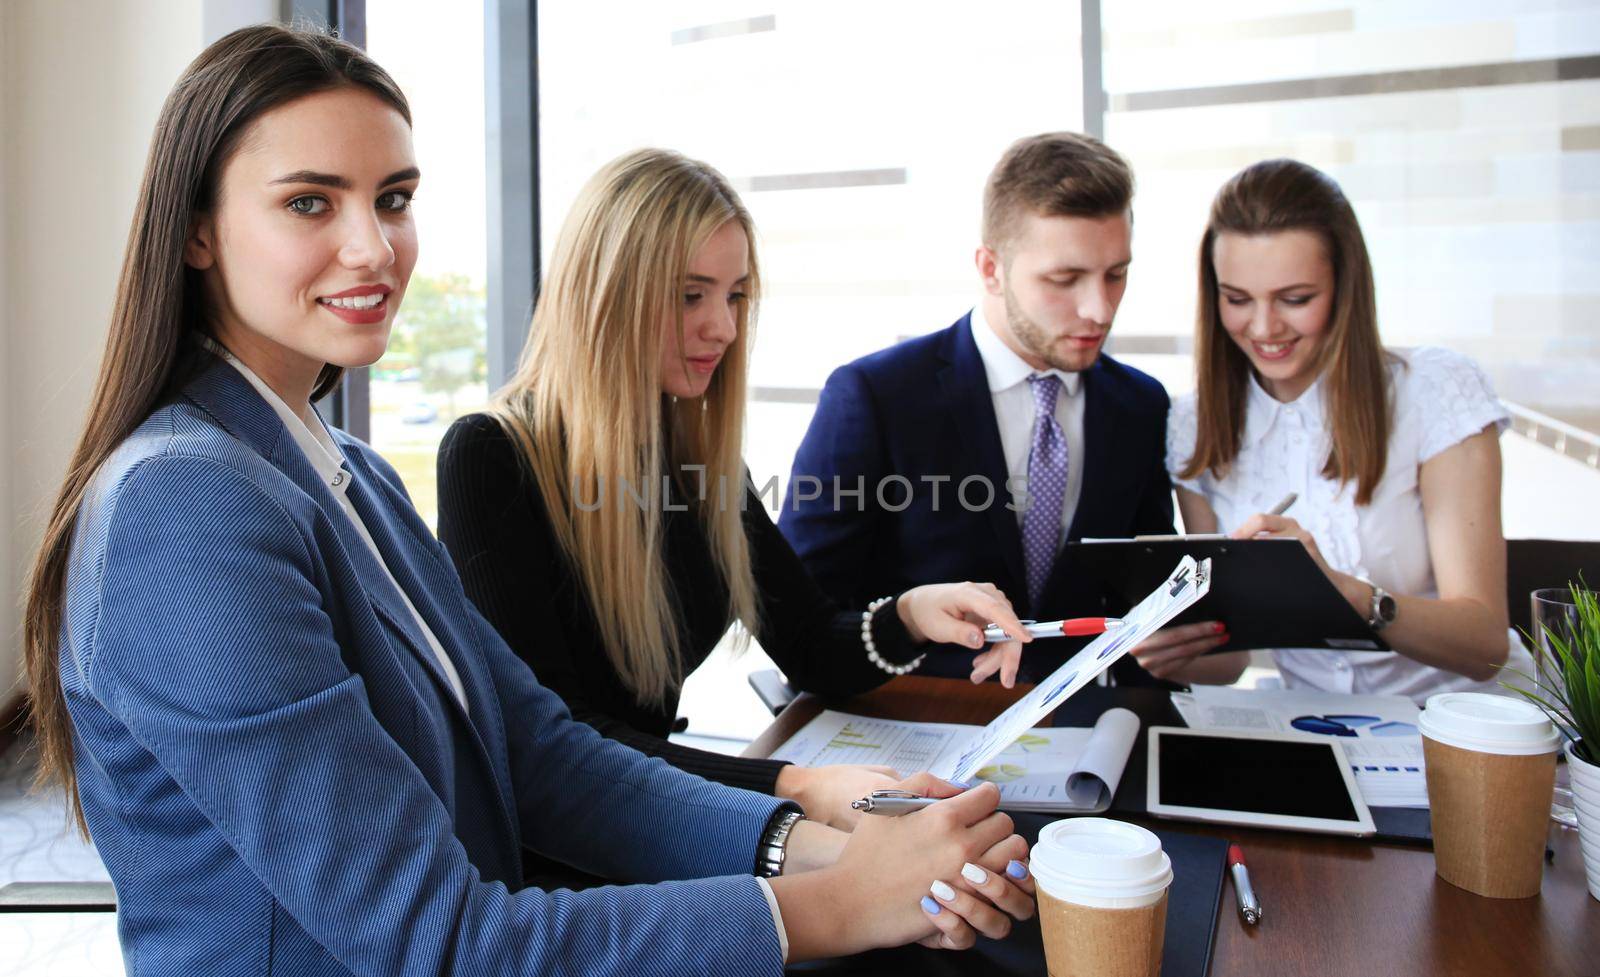 Image of four successful businesswomen looking at camera at meeting by tsyhun